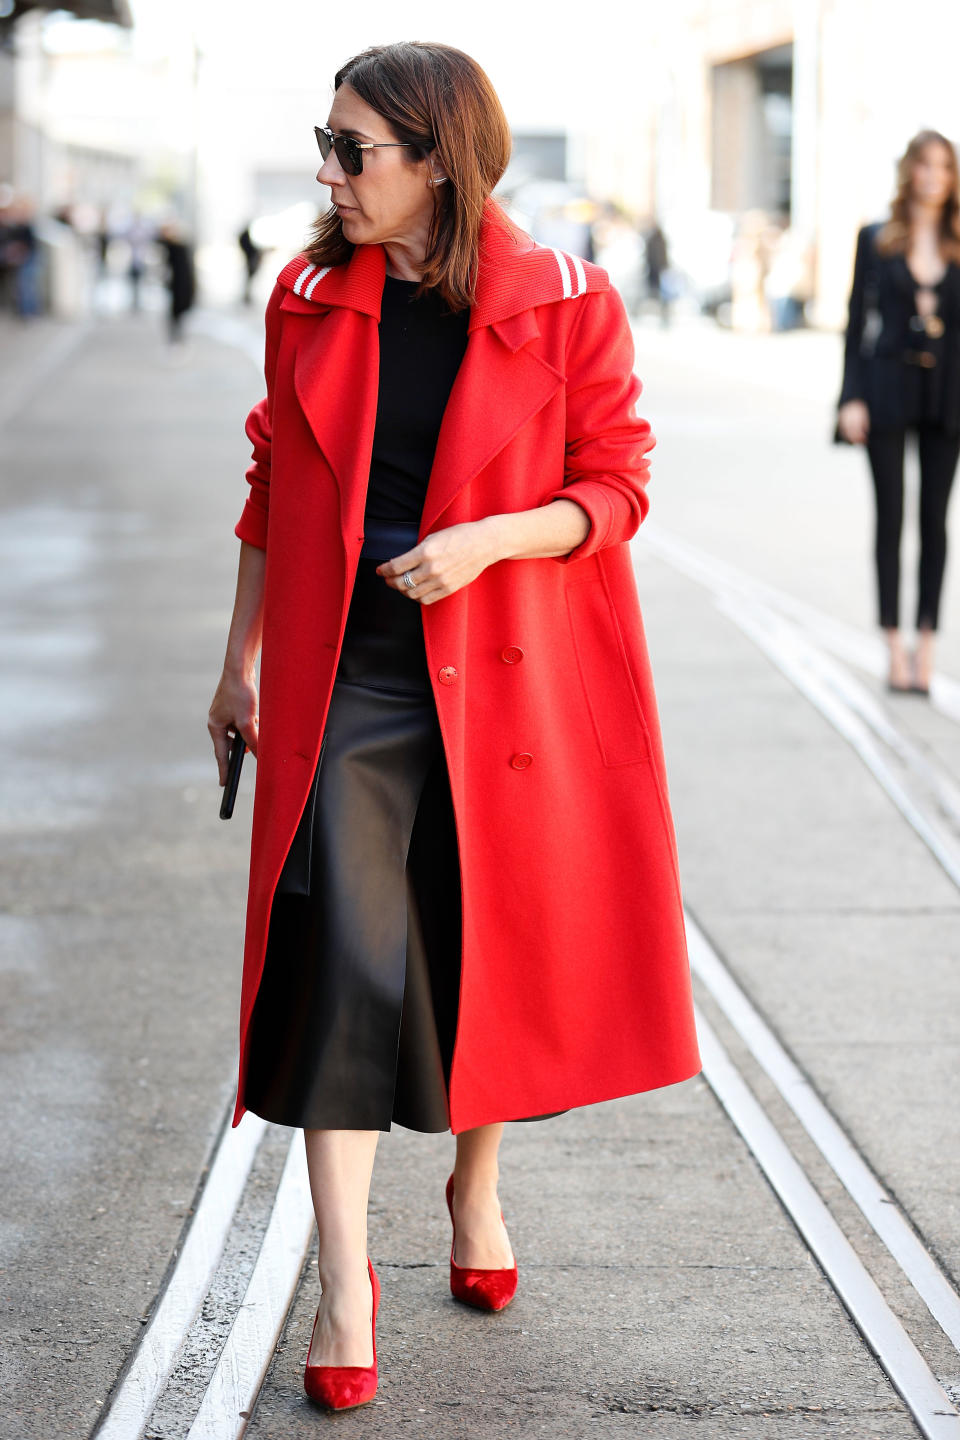 Vogue Australia Editor-in-Chief Edwina McCann wears a red coat and heels during Mercedes-Benz Fashion Week on May 14 in Sydney.